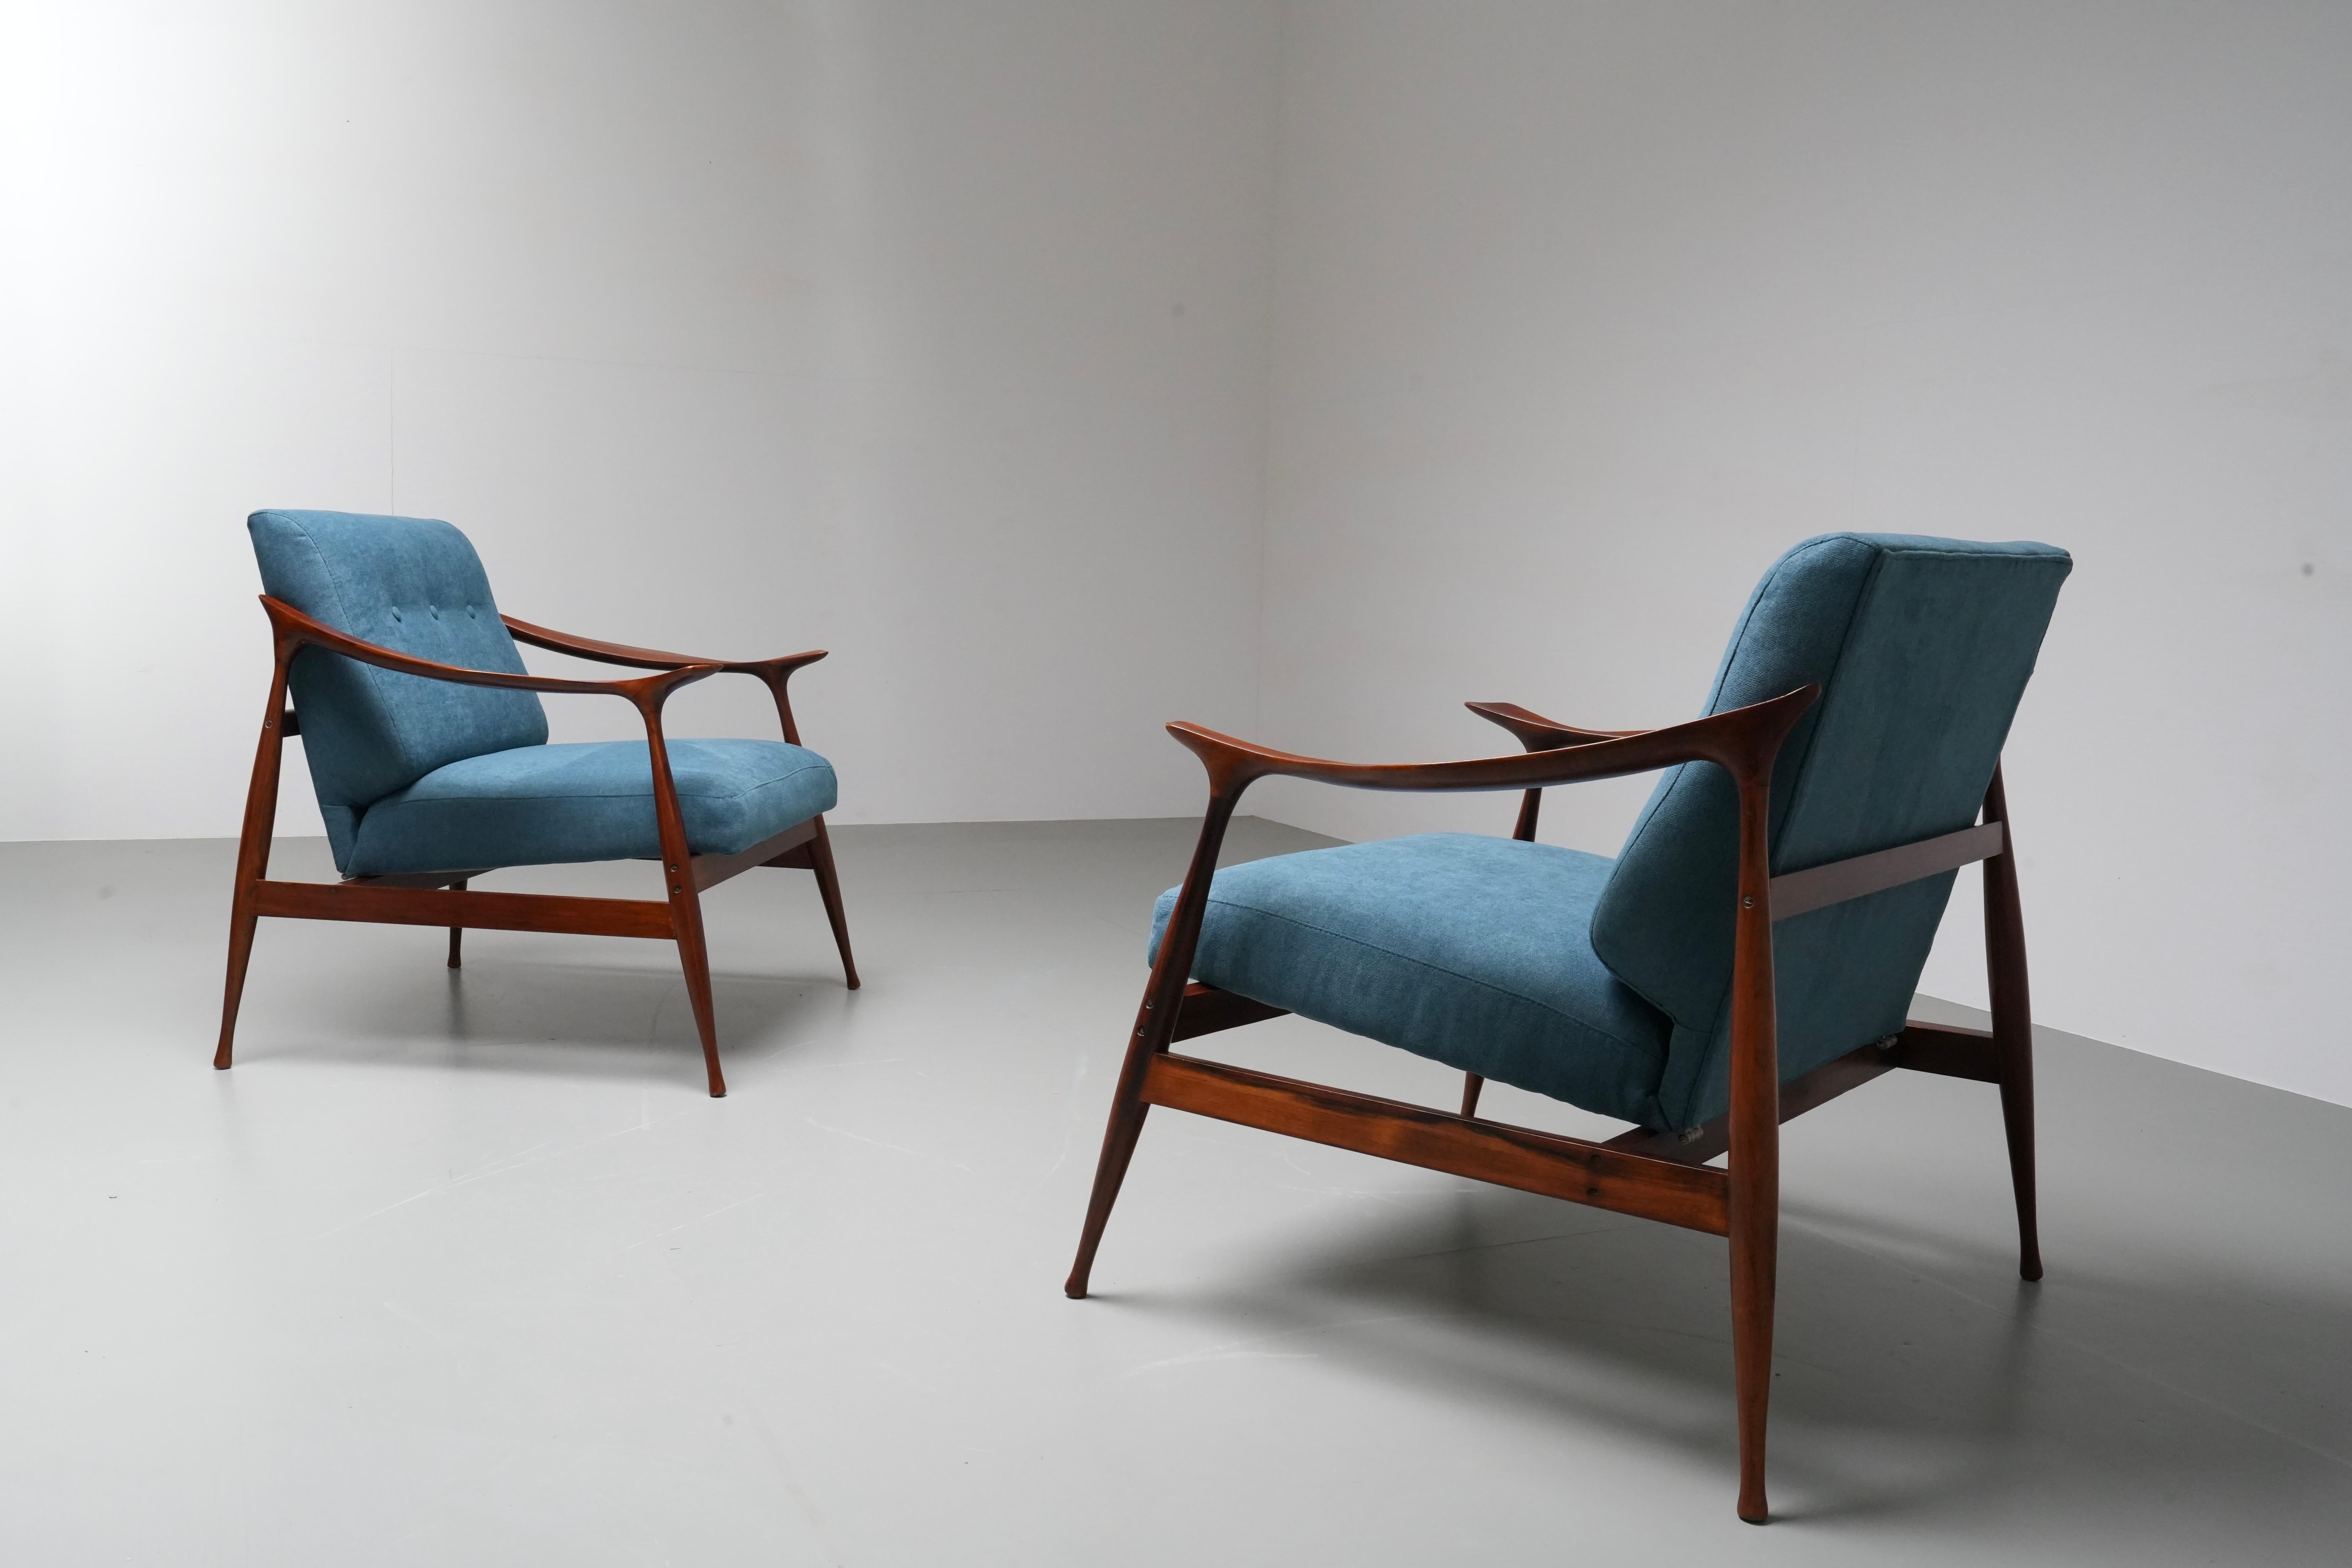 Italian Set of two Lounge Chairs by Ico Parisi for Fratelli Reguitti, Italy, 1959 For Sale